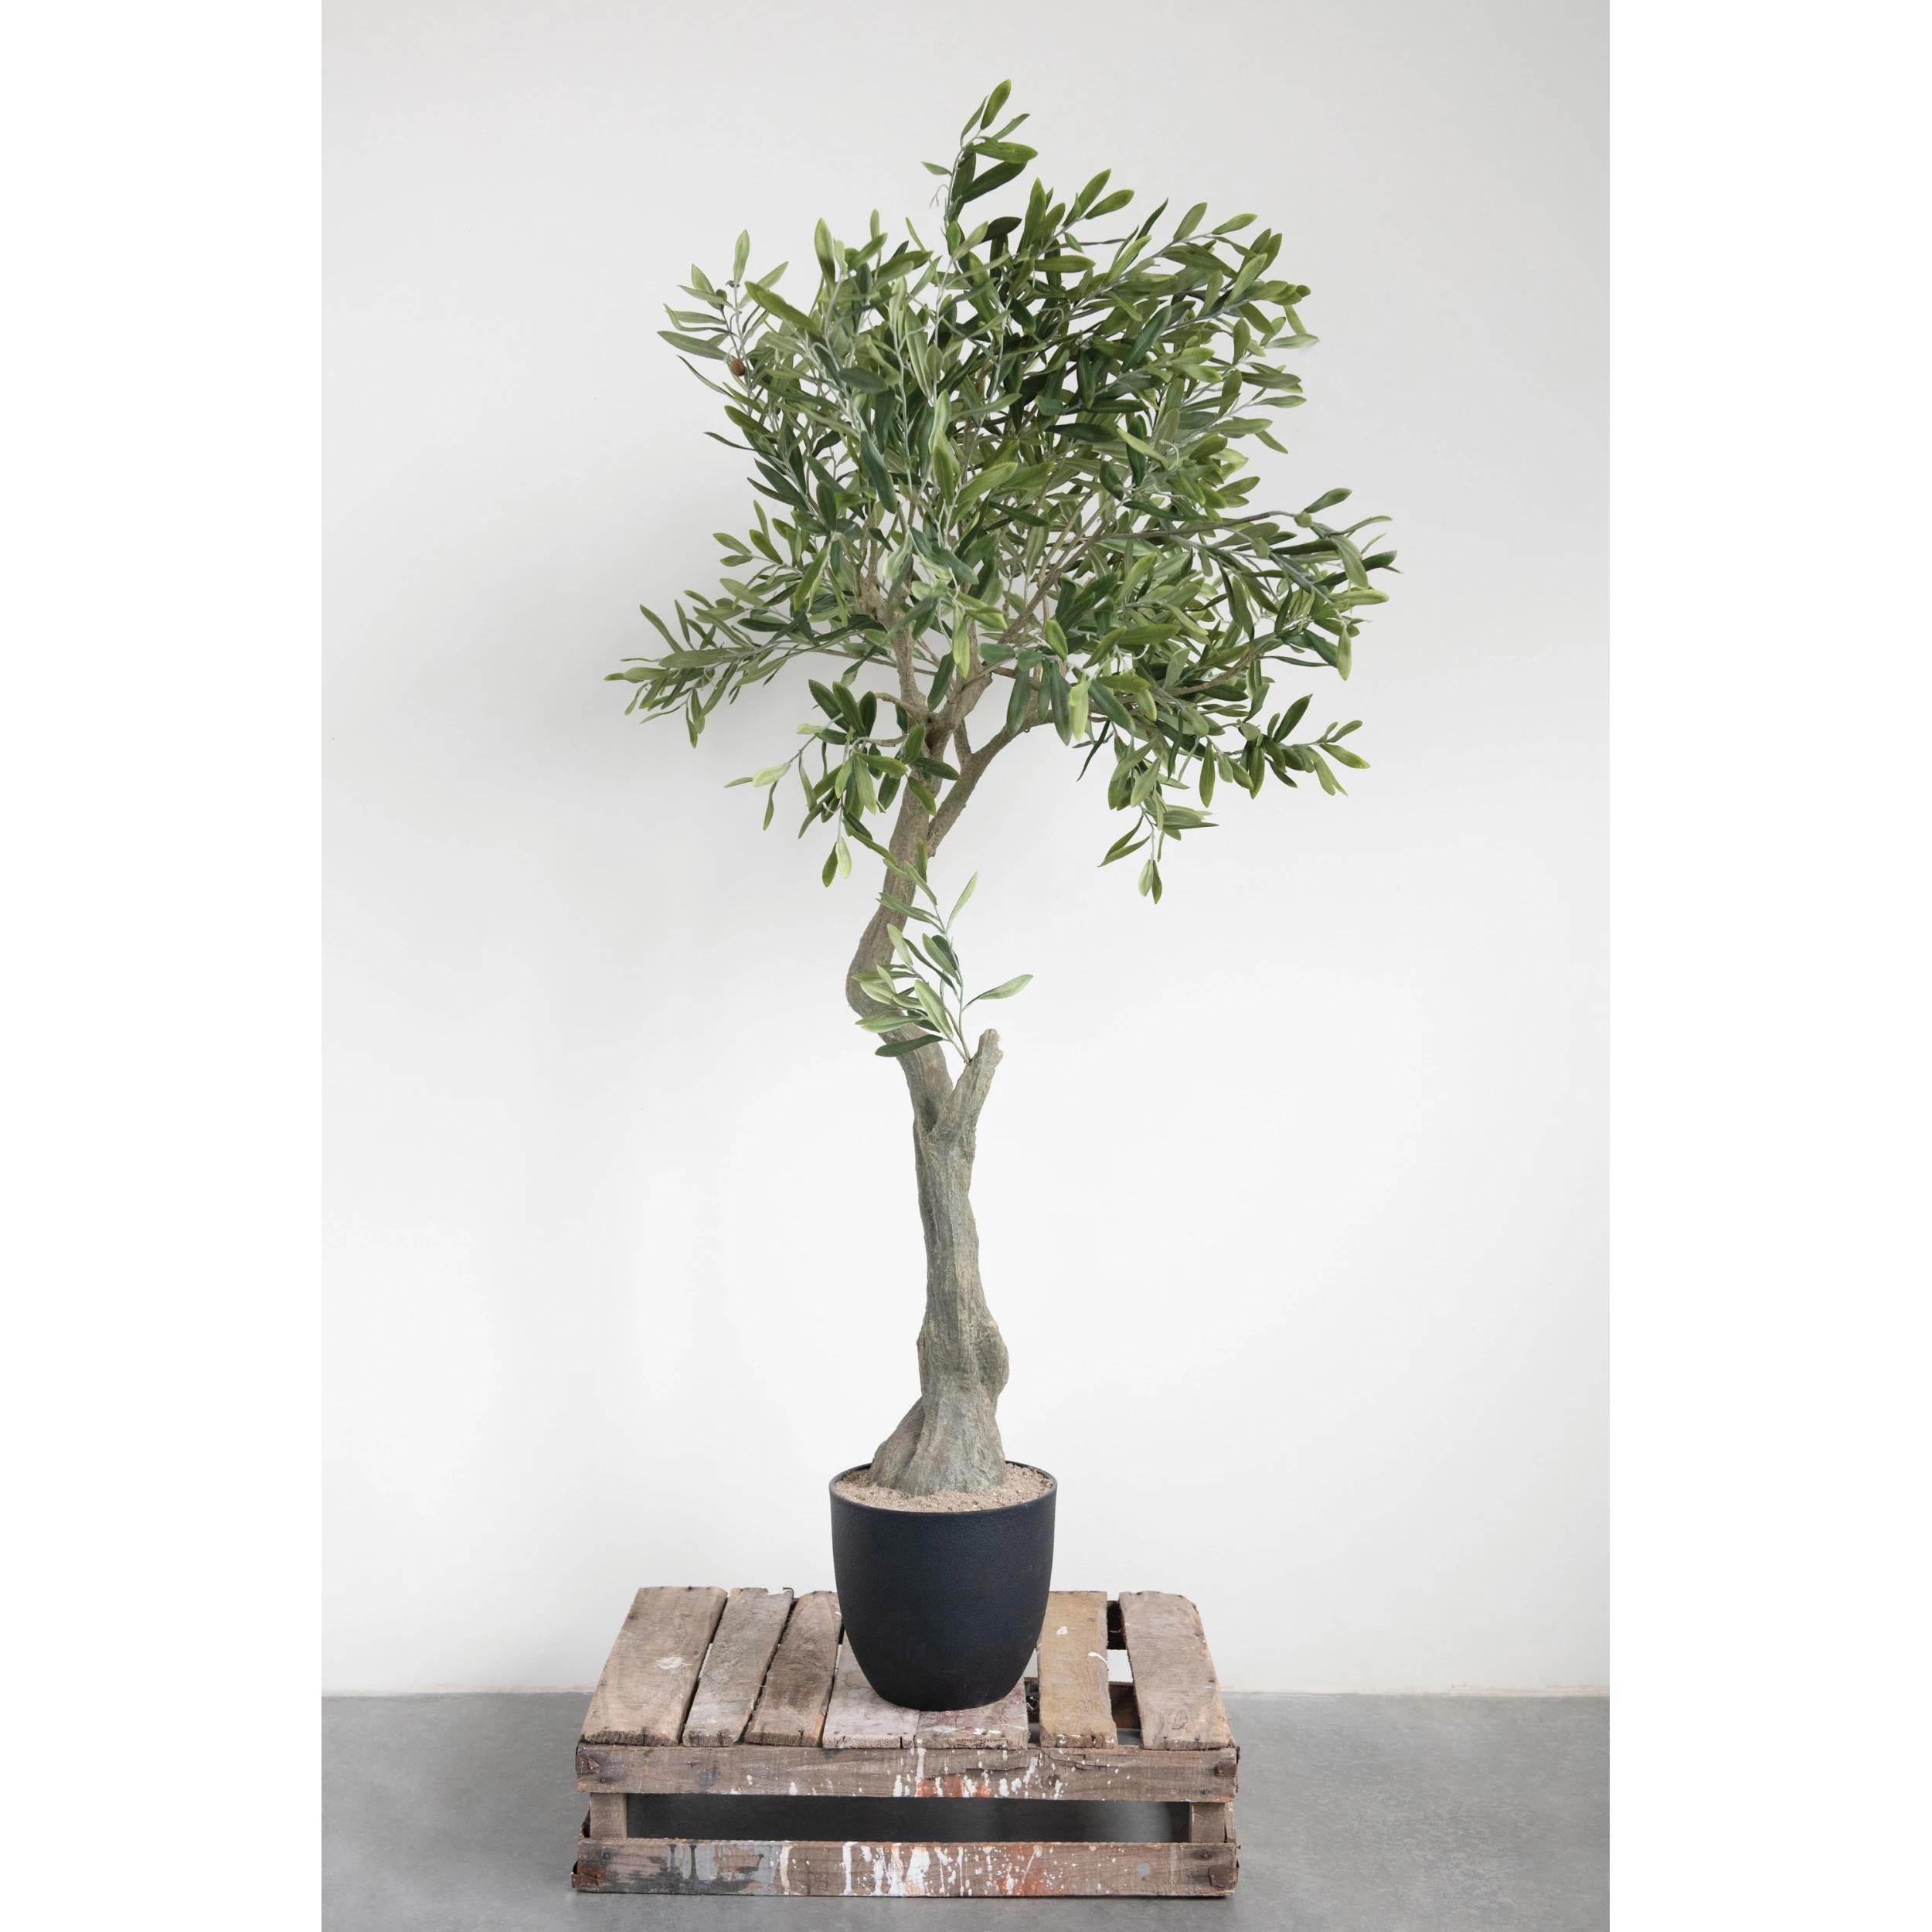 60-1/4"H Faux Olive Tree in Pot - Image 1